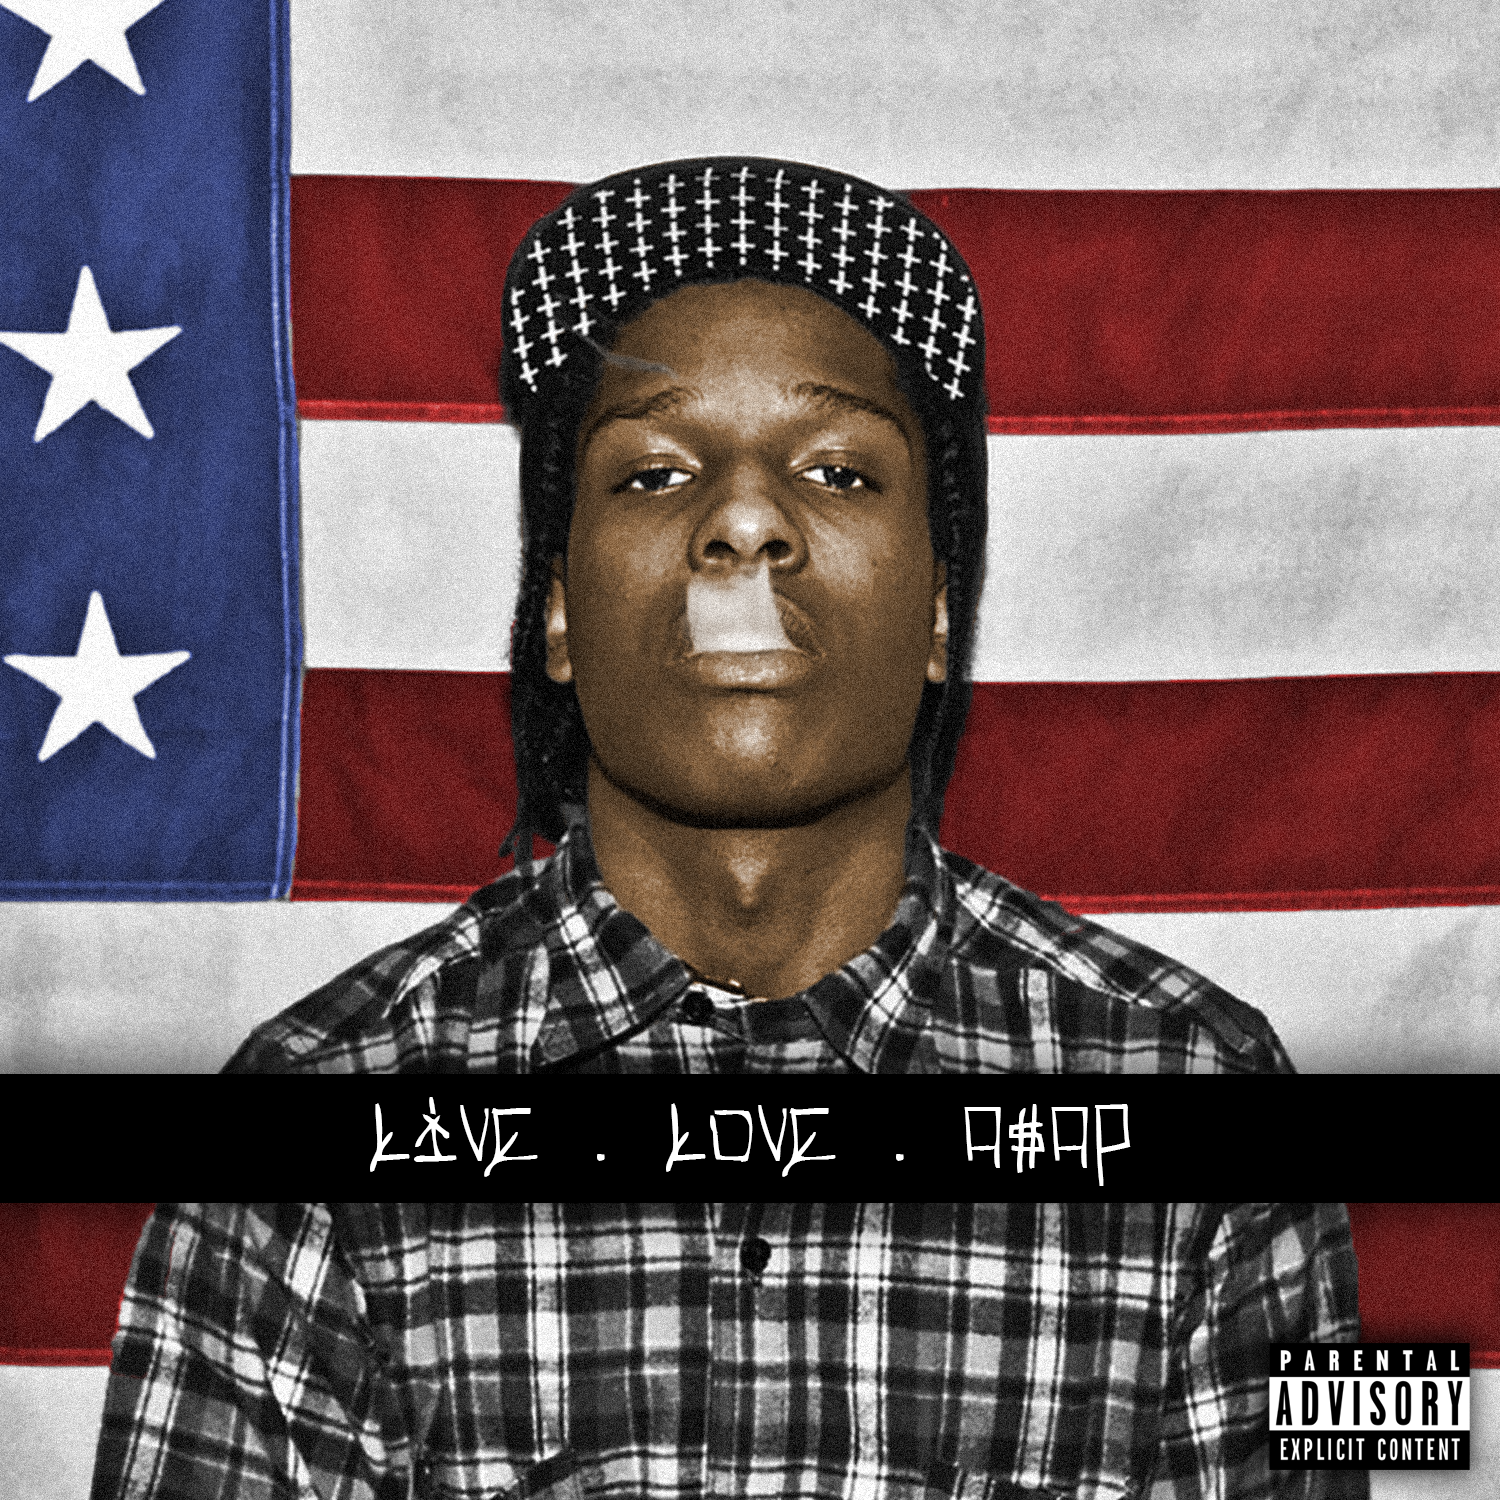 LIVE.LOVE.A$AP with color